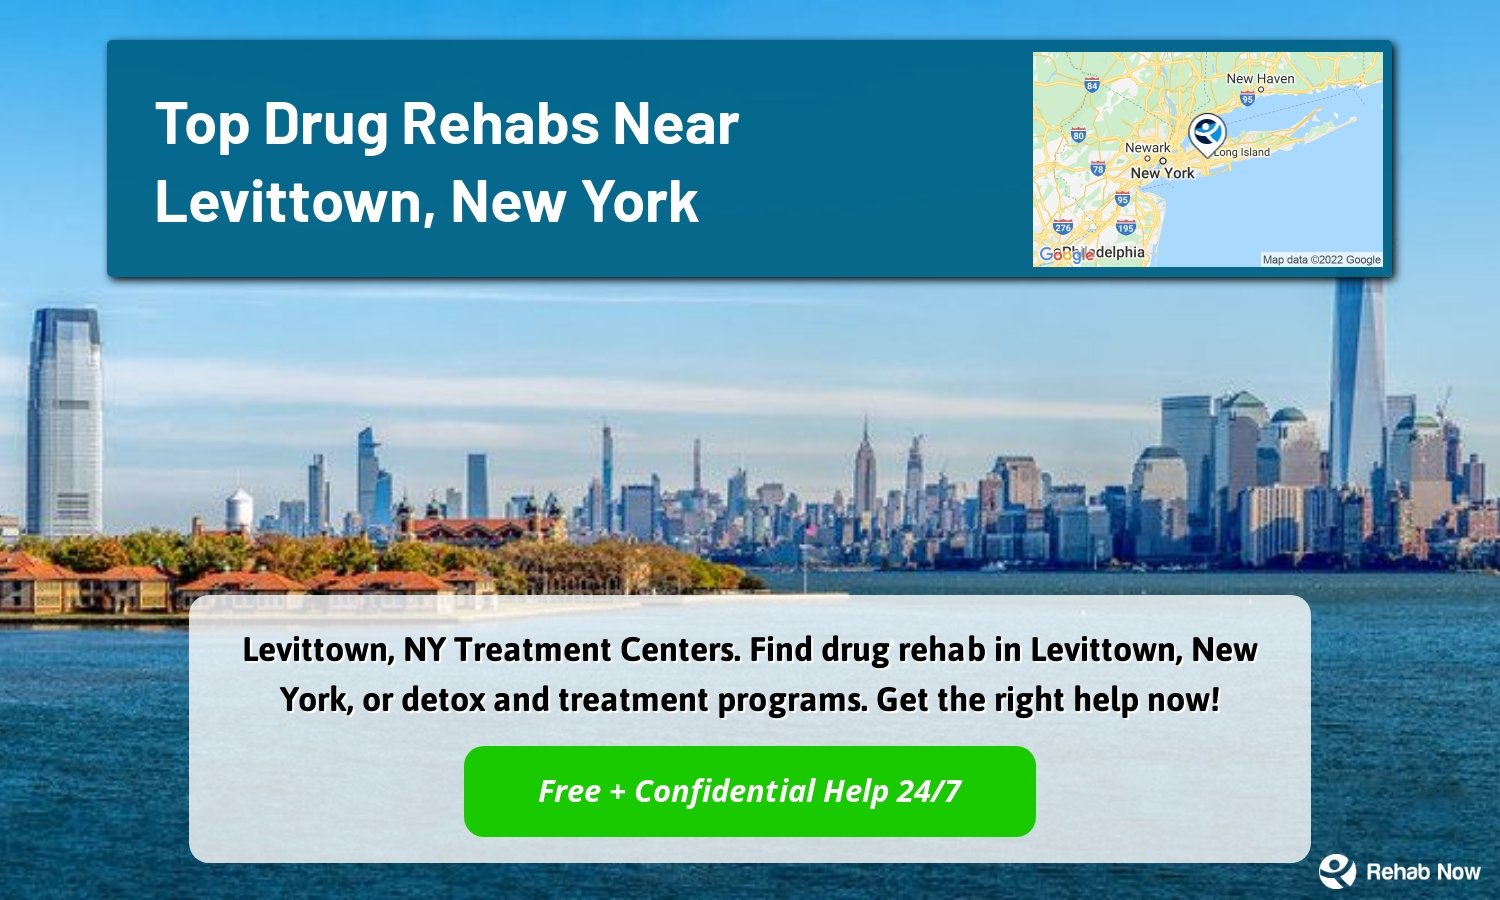 Levittown, NY Treatment Centers. Find drug rehab in Levittown, New York, or detox and treatment programs. Get the right help now!